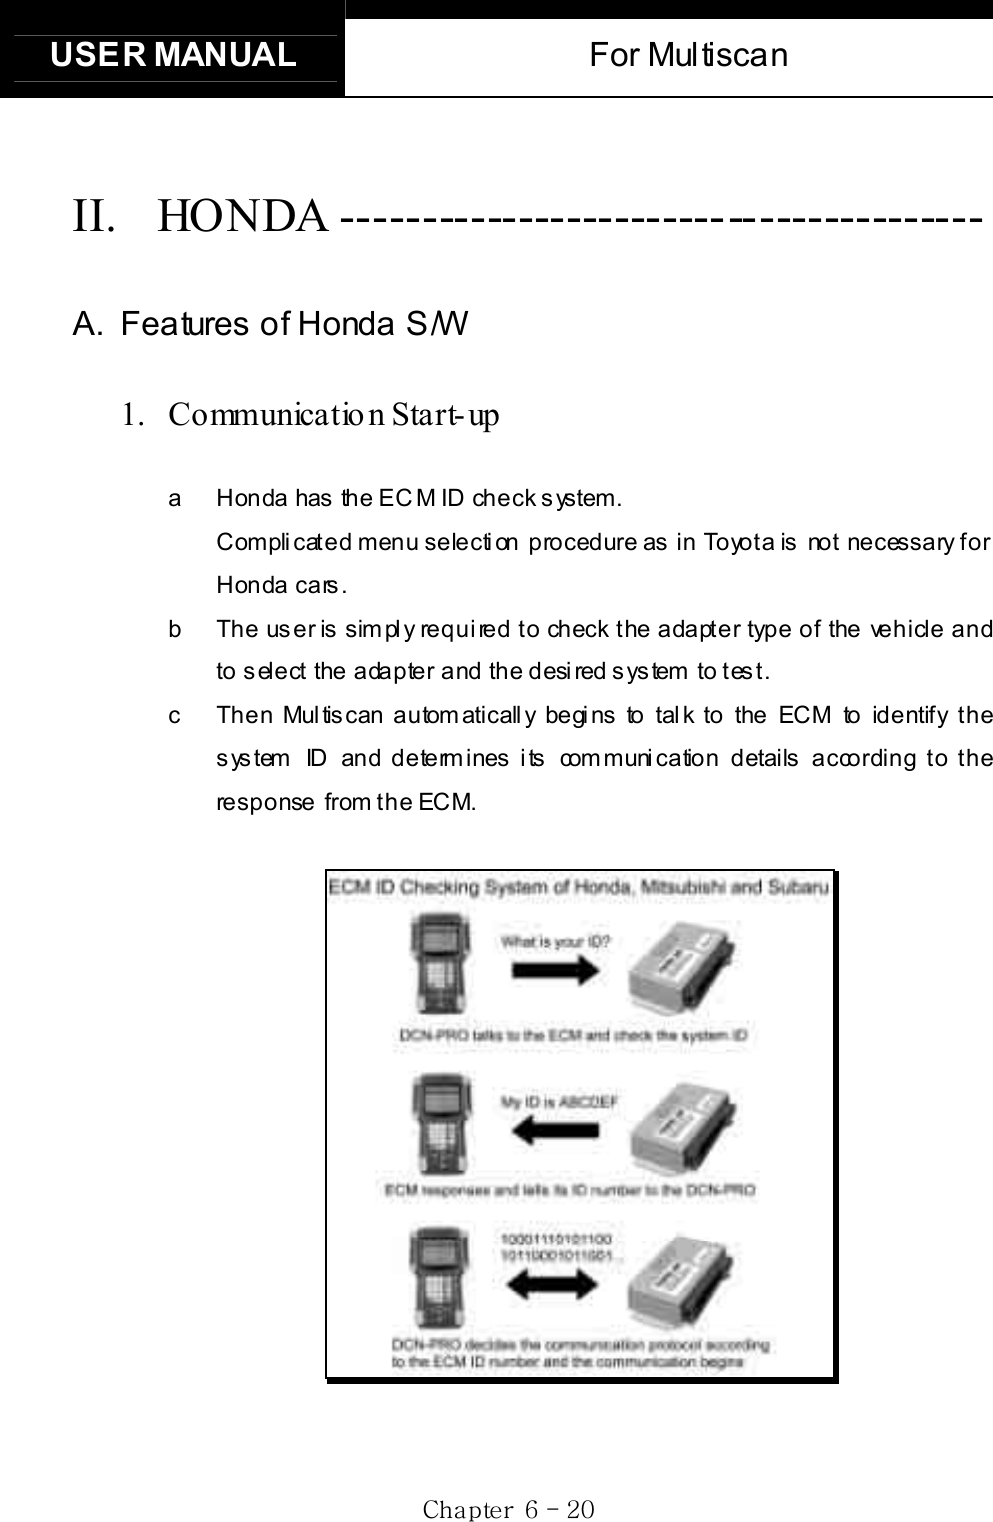 USER MANUAL  For Multiscan Gj G]G TGYWGII. HONDA ---------------------------------------- A.  Features of Honda S/W 1. Communicatio n Start-up a  Honda has the ECM ID check system.   Complicated menu selection  procedure as in  Toyota is  not necessary for Honda cars.   b  The user is simply required to check the adapter type of the vehicle and to select the adapter and the desired system to test.   c  Then Multiscan automatically begins to talk to the ECM to identify the system ID and determines its communication details according to the response from the ECM. 